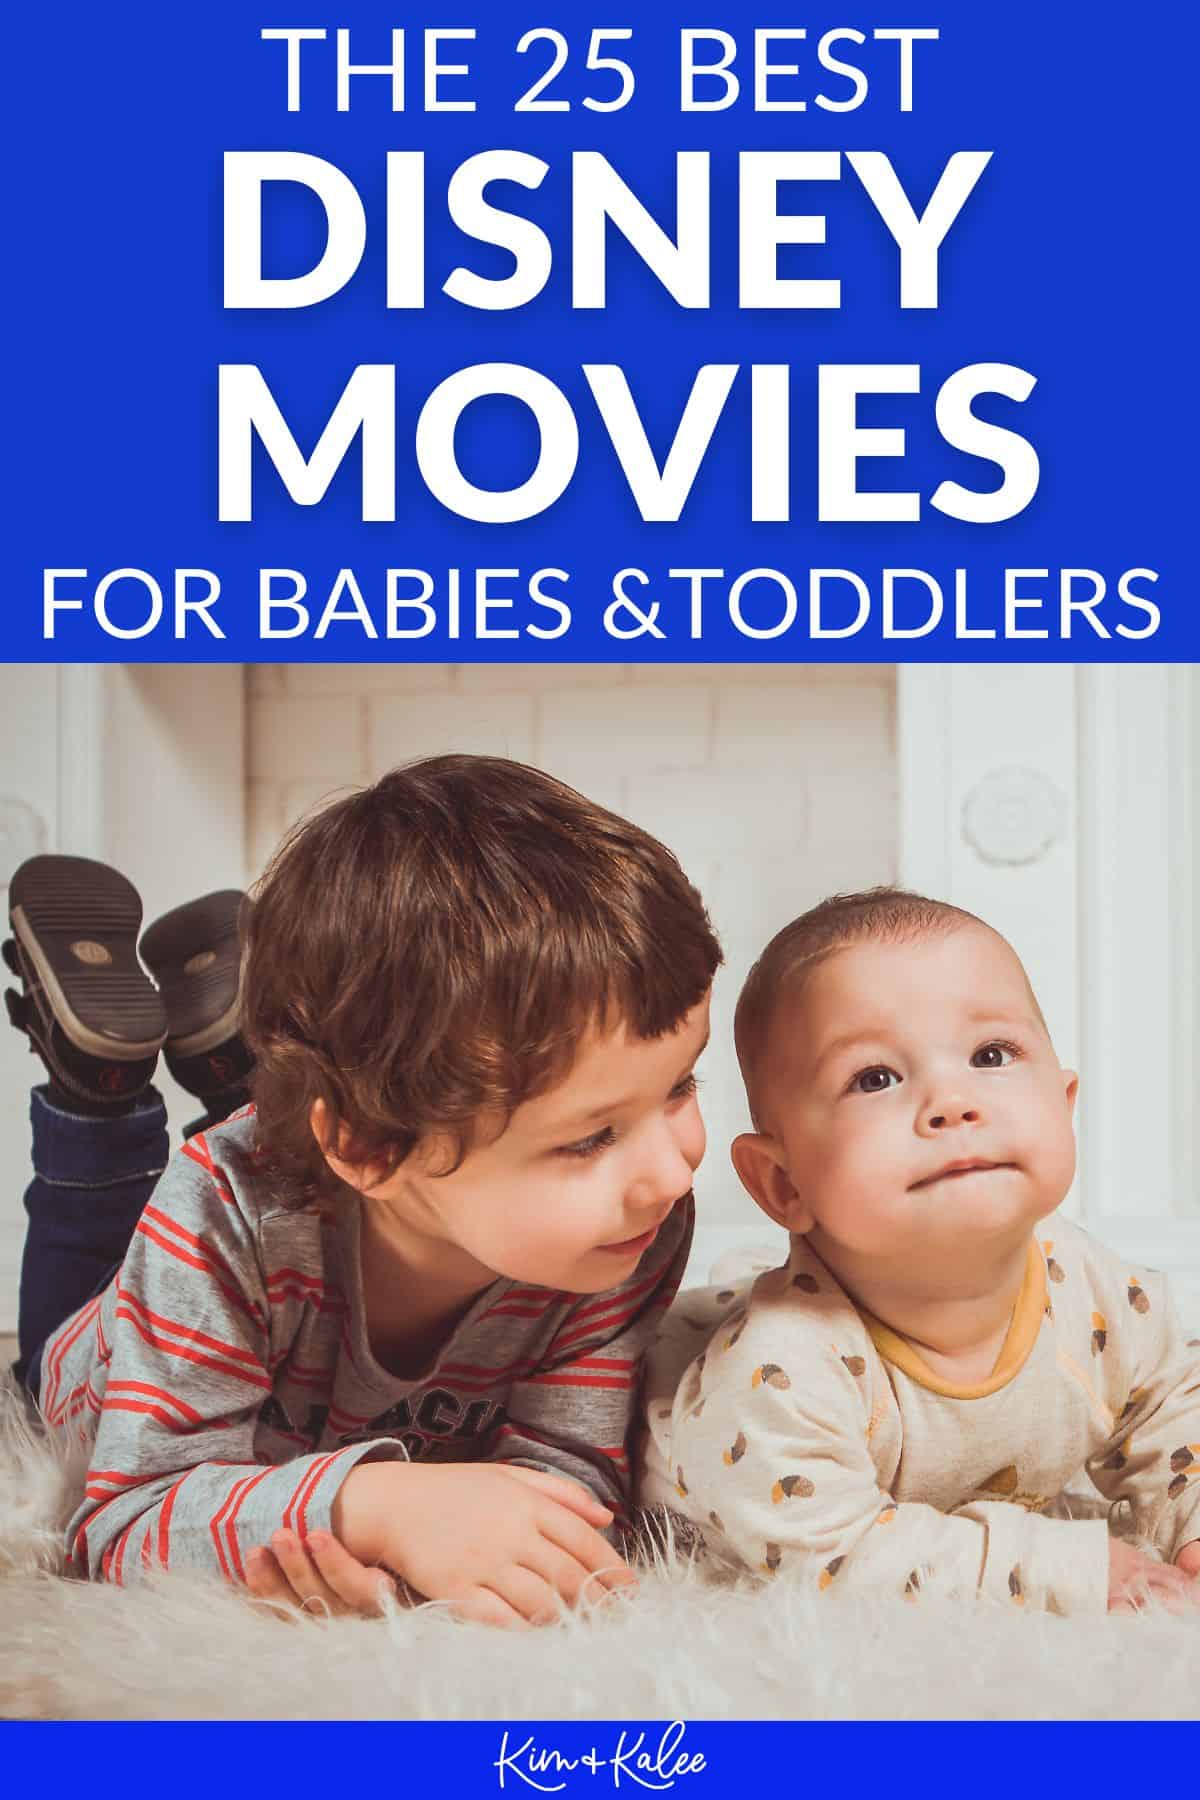 text overlay: the 25 best disney movies for babies and toddlers - photo of a toddler with is baby brother 